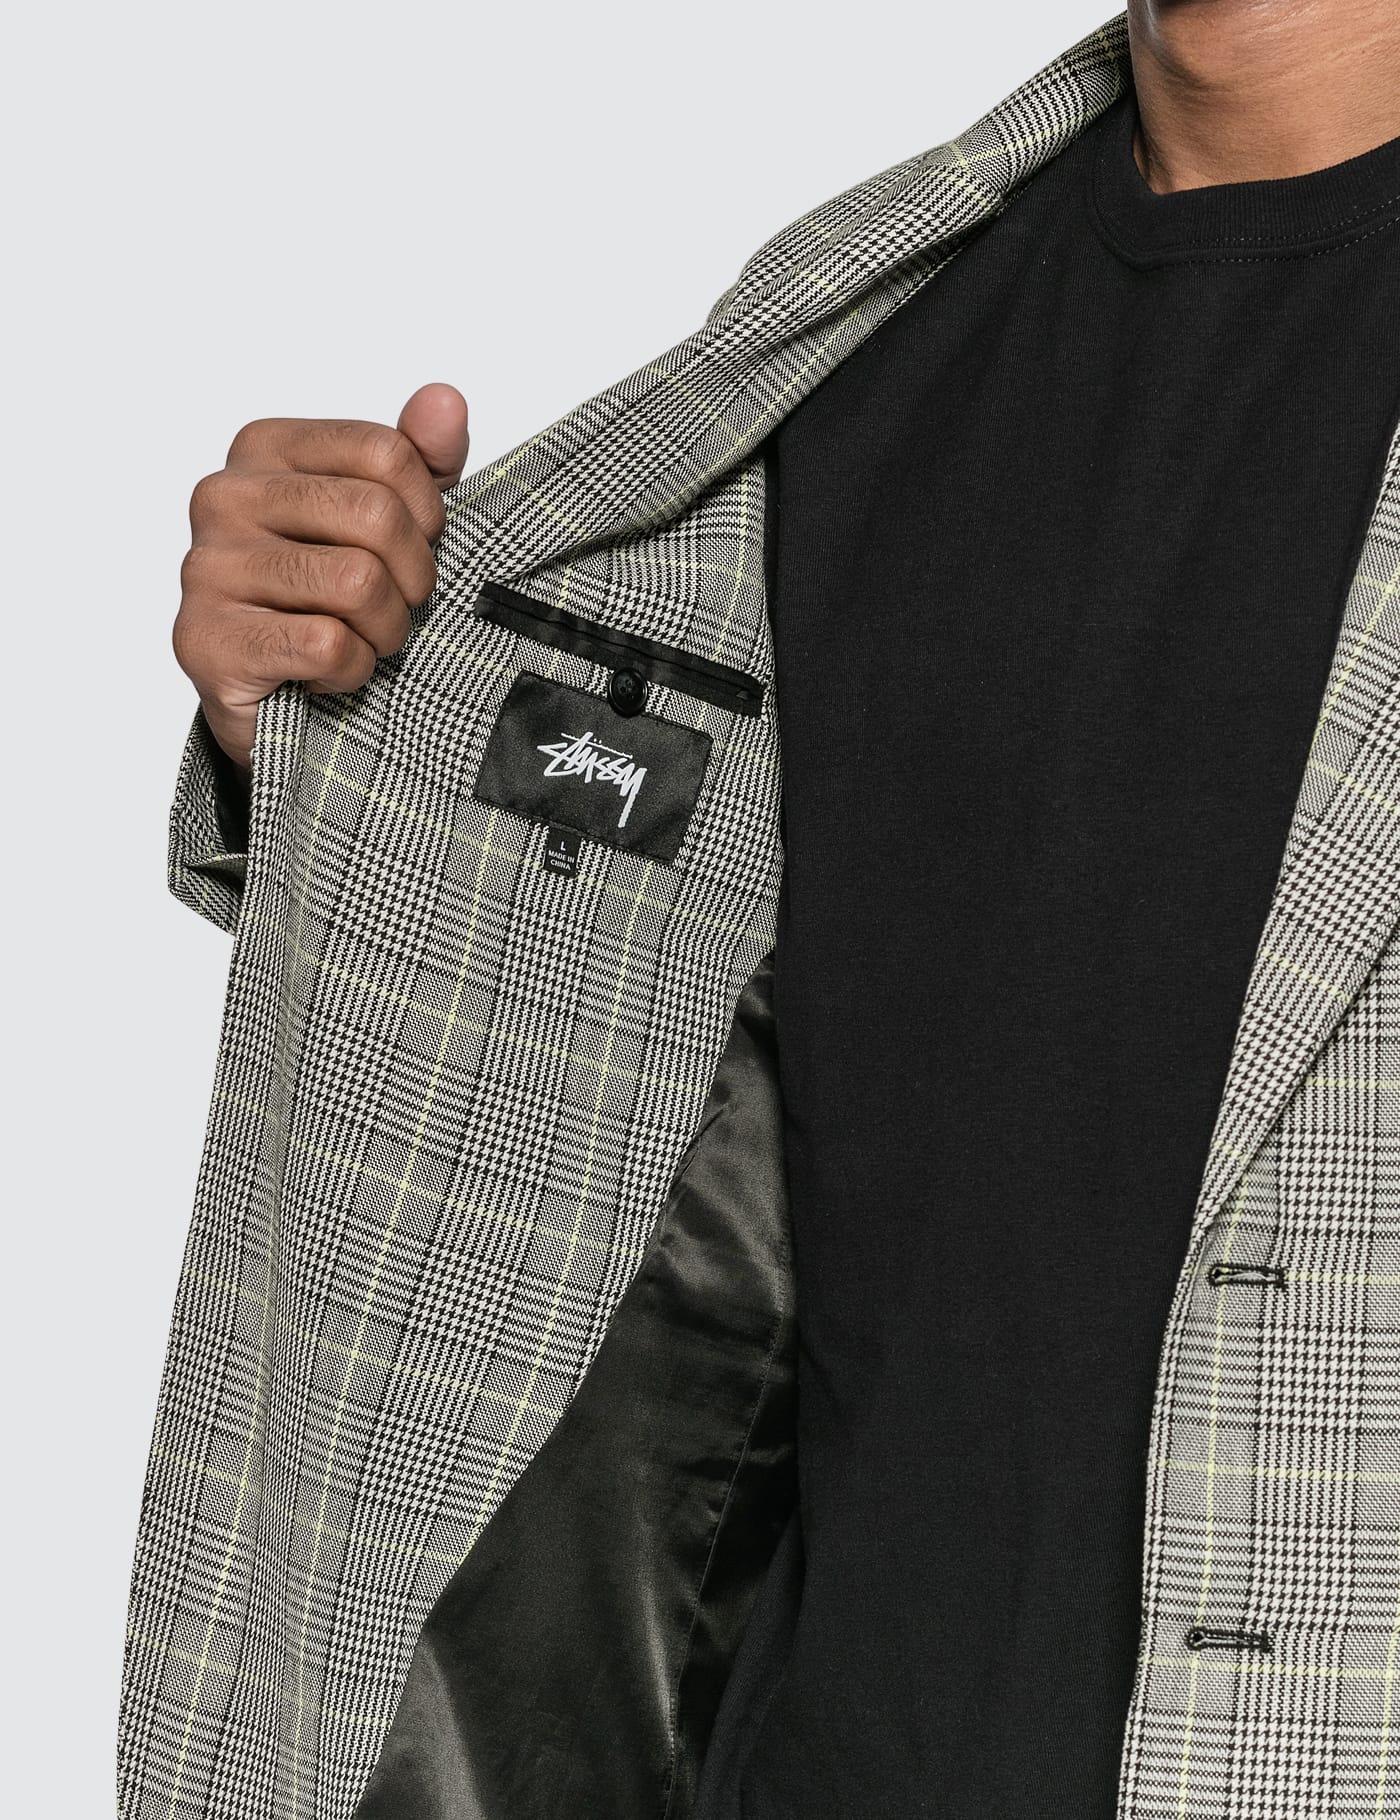 Stüssy - Sport Coat | HBX - Globally Curated Fashion and Lifestyle